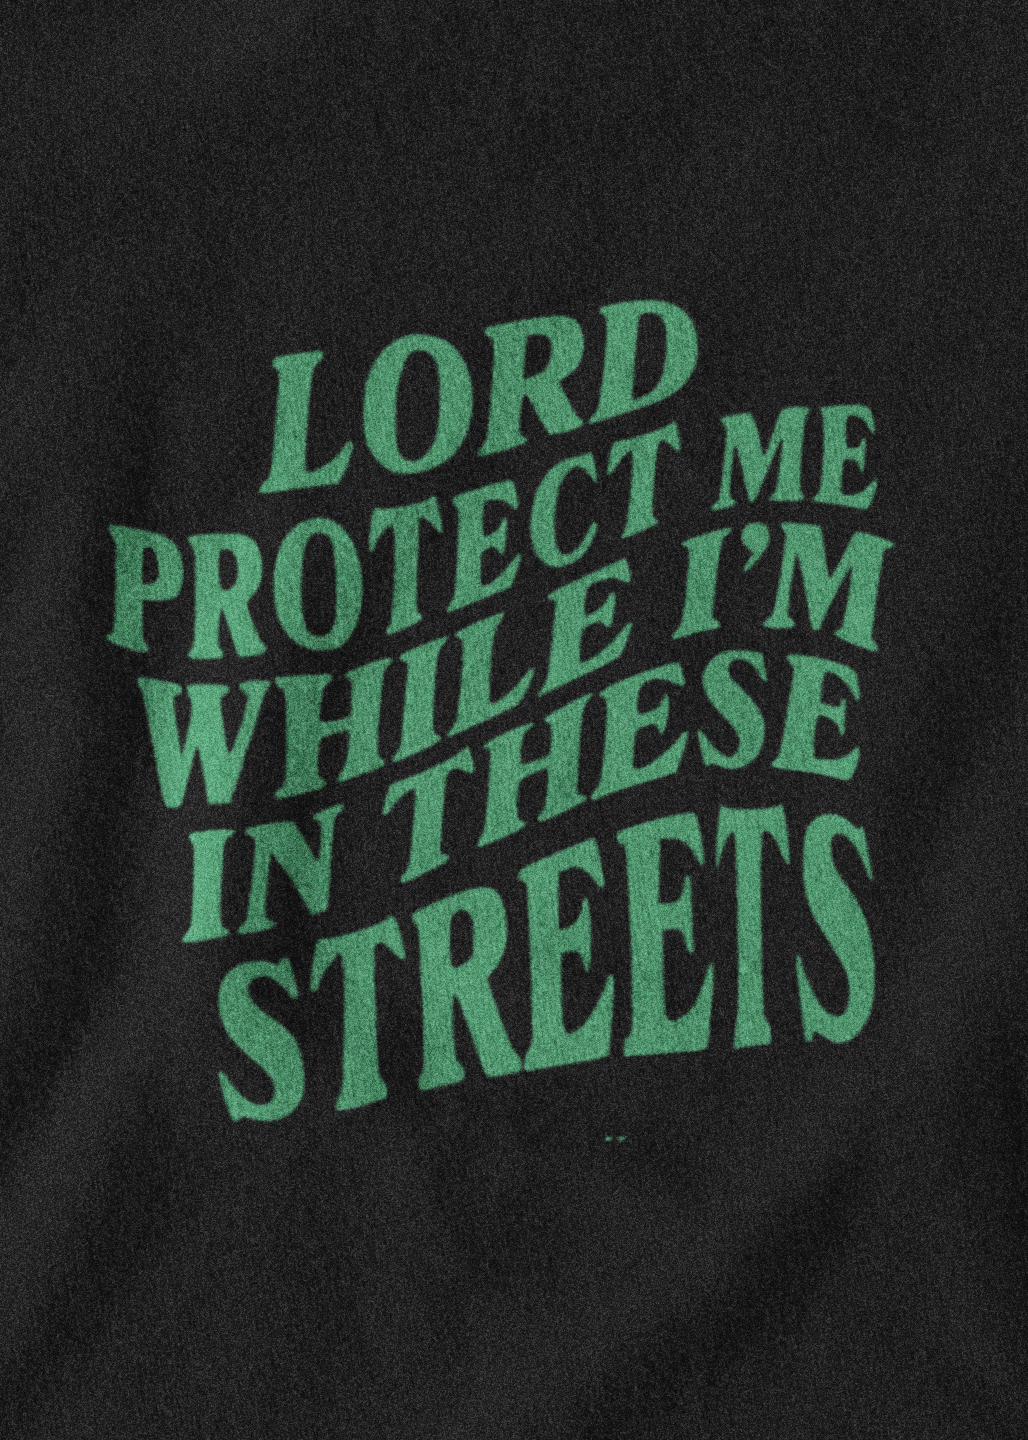 Lord protect me while i'm in these streets